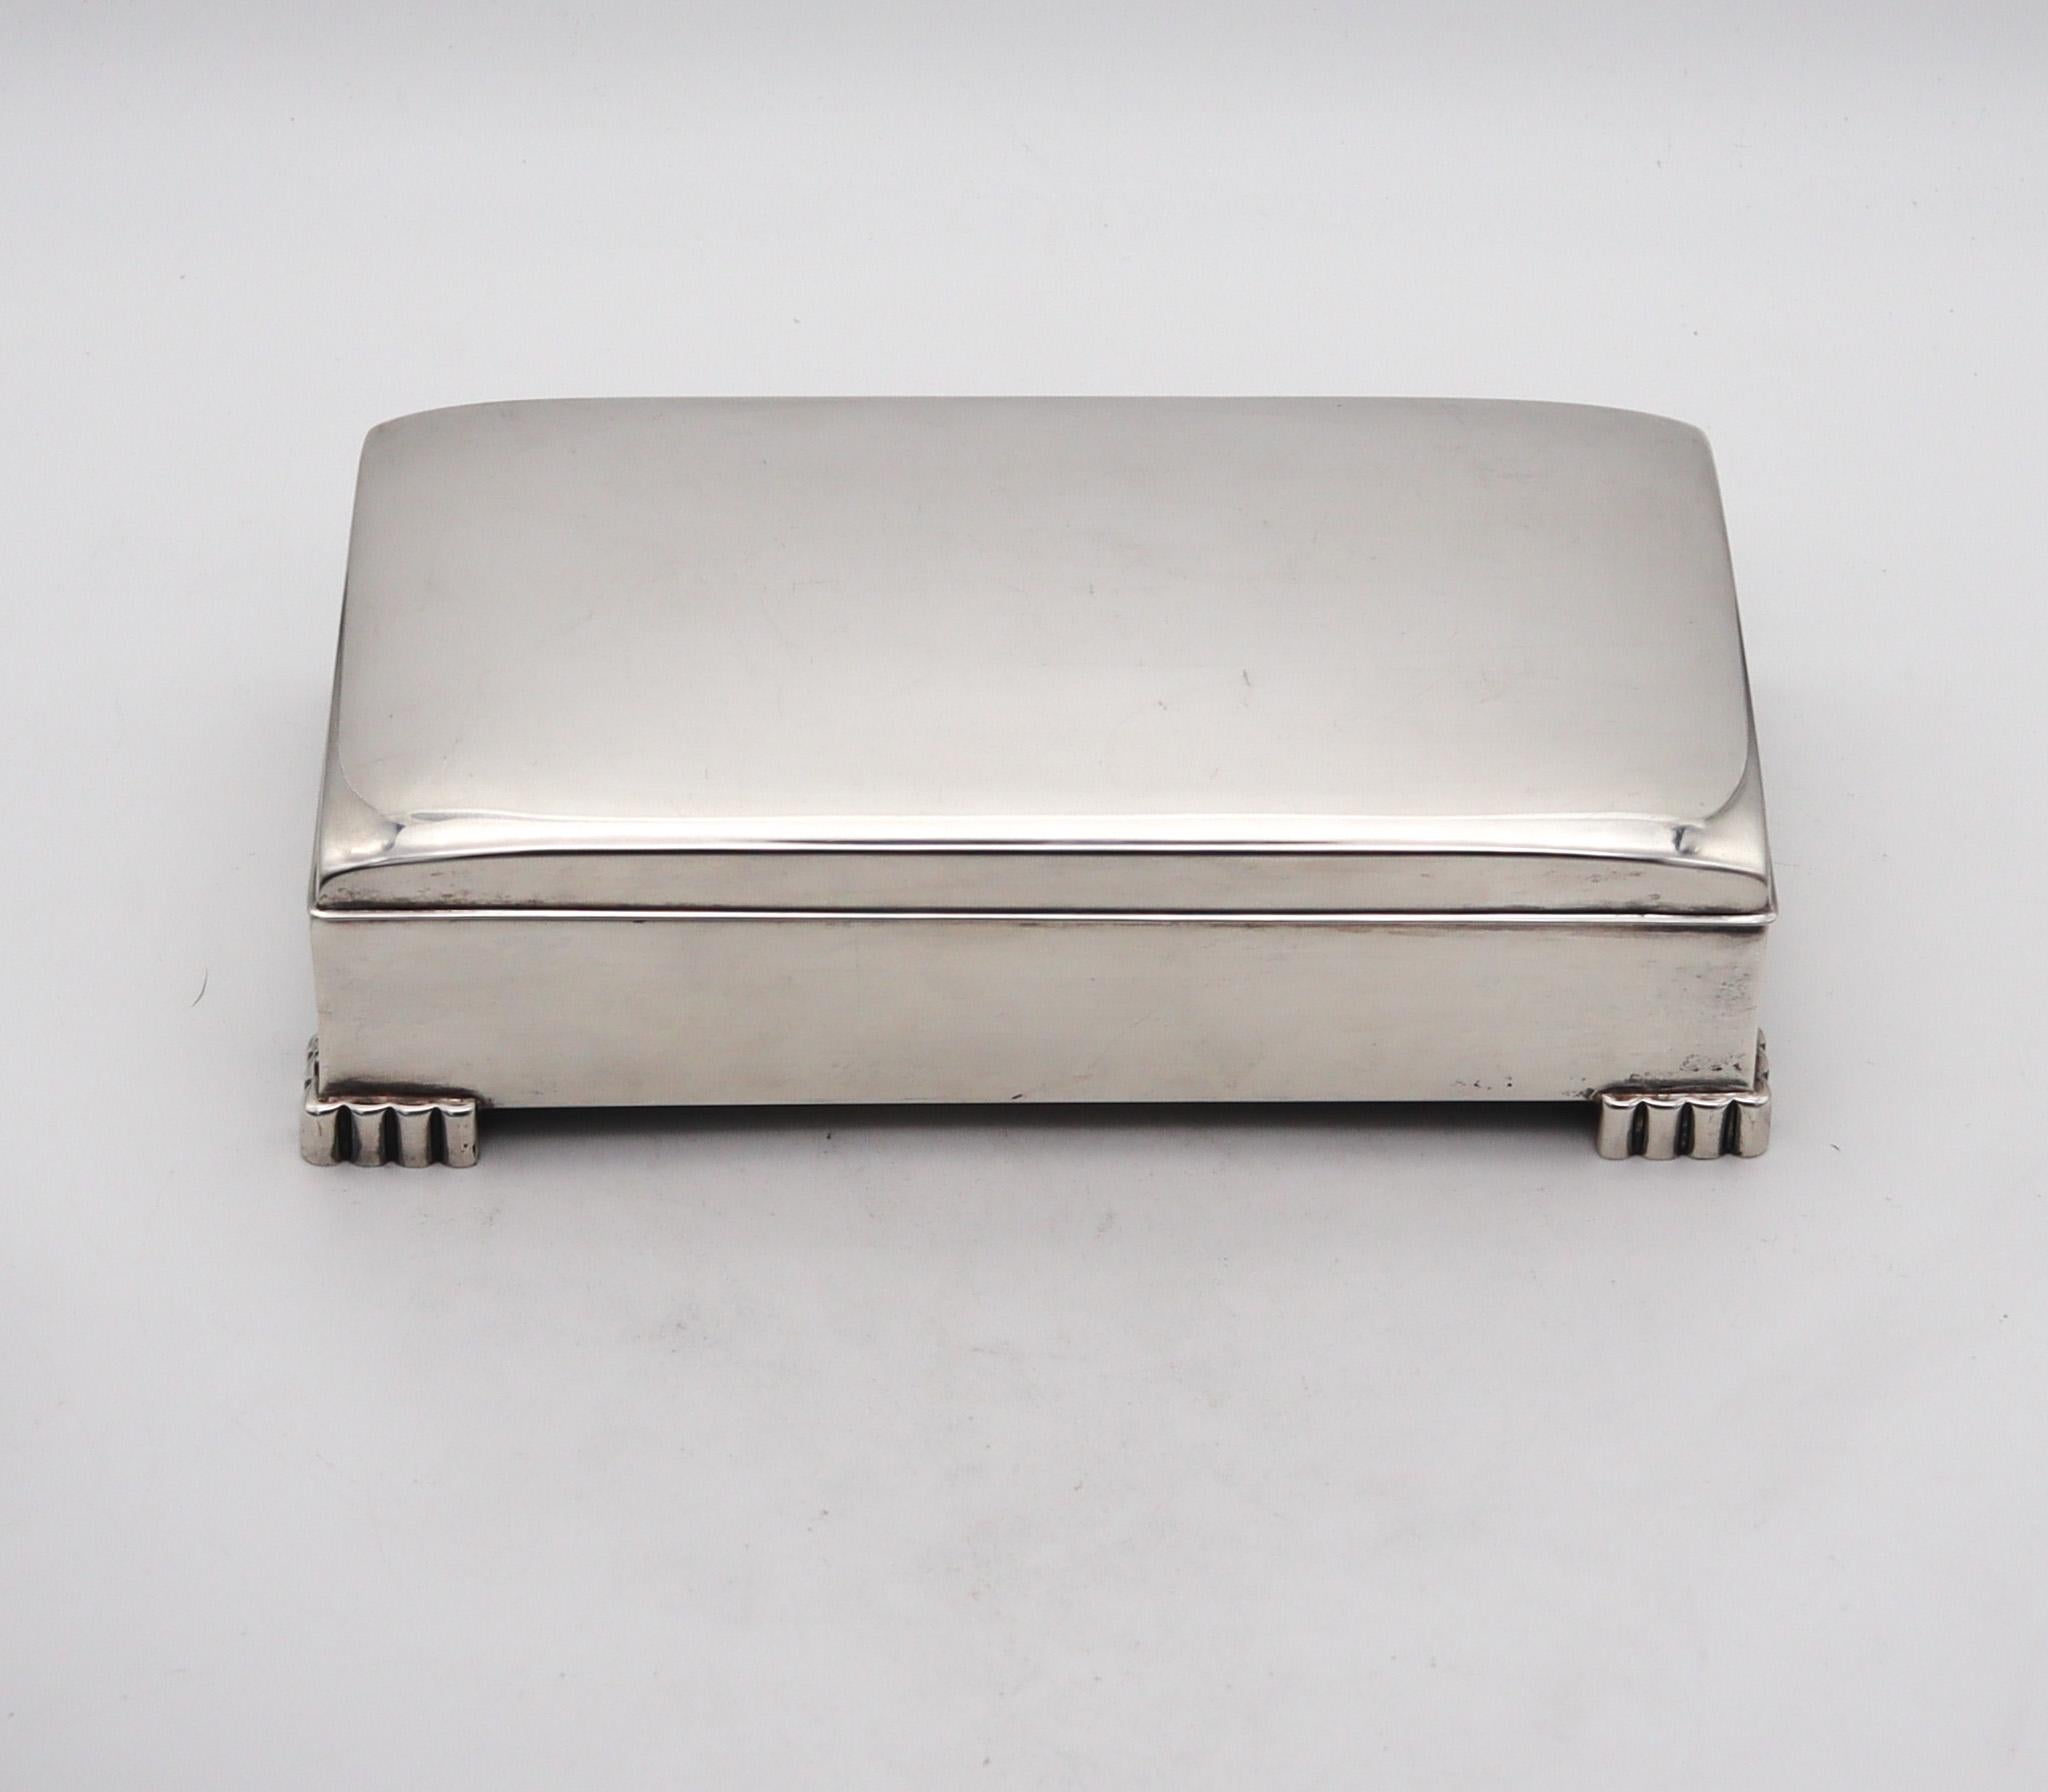 An art deco desk box designed by Poole Silver Co. American, Founded in 1893.

Very elegant rectangular box, created in America during the art deco period back in the 1930-1940. This elegant desk box was crafted by the Poole Silver Co. with sharp